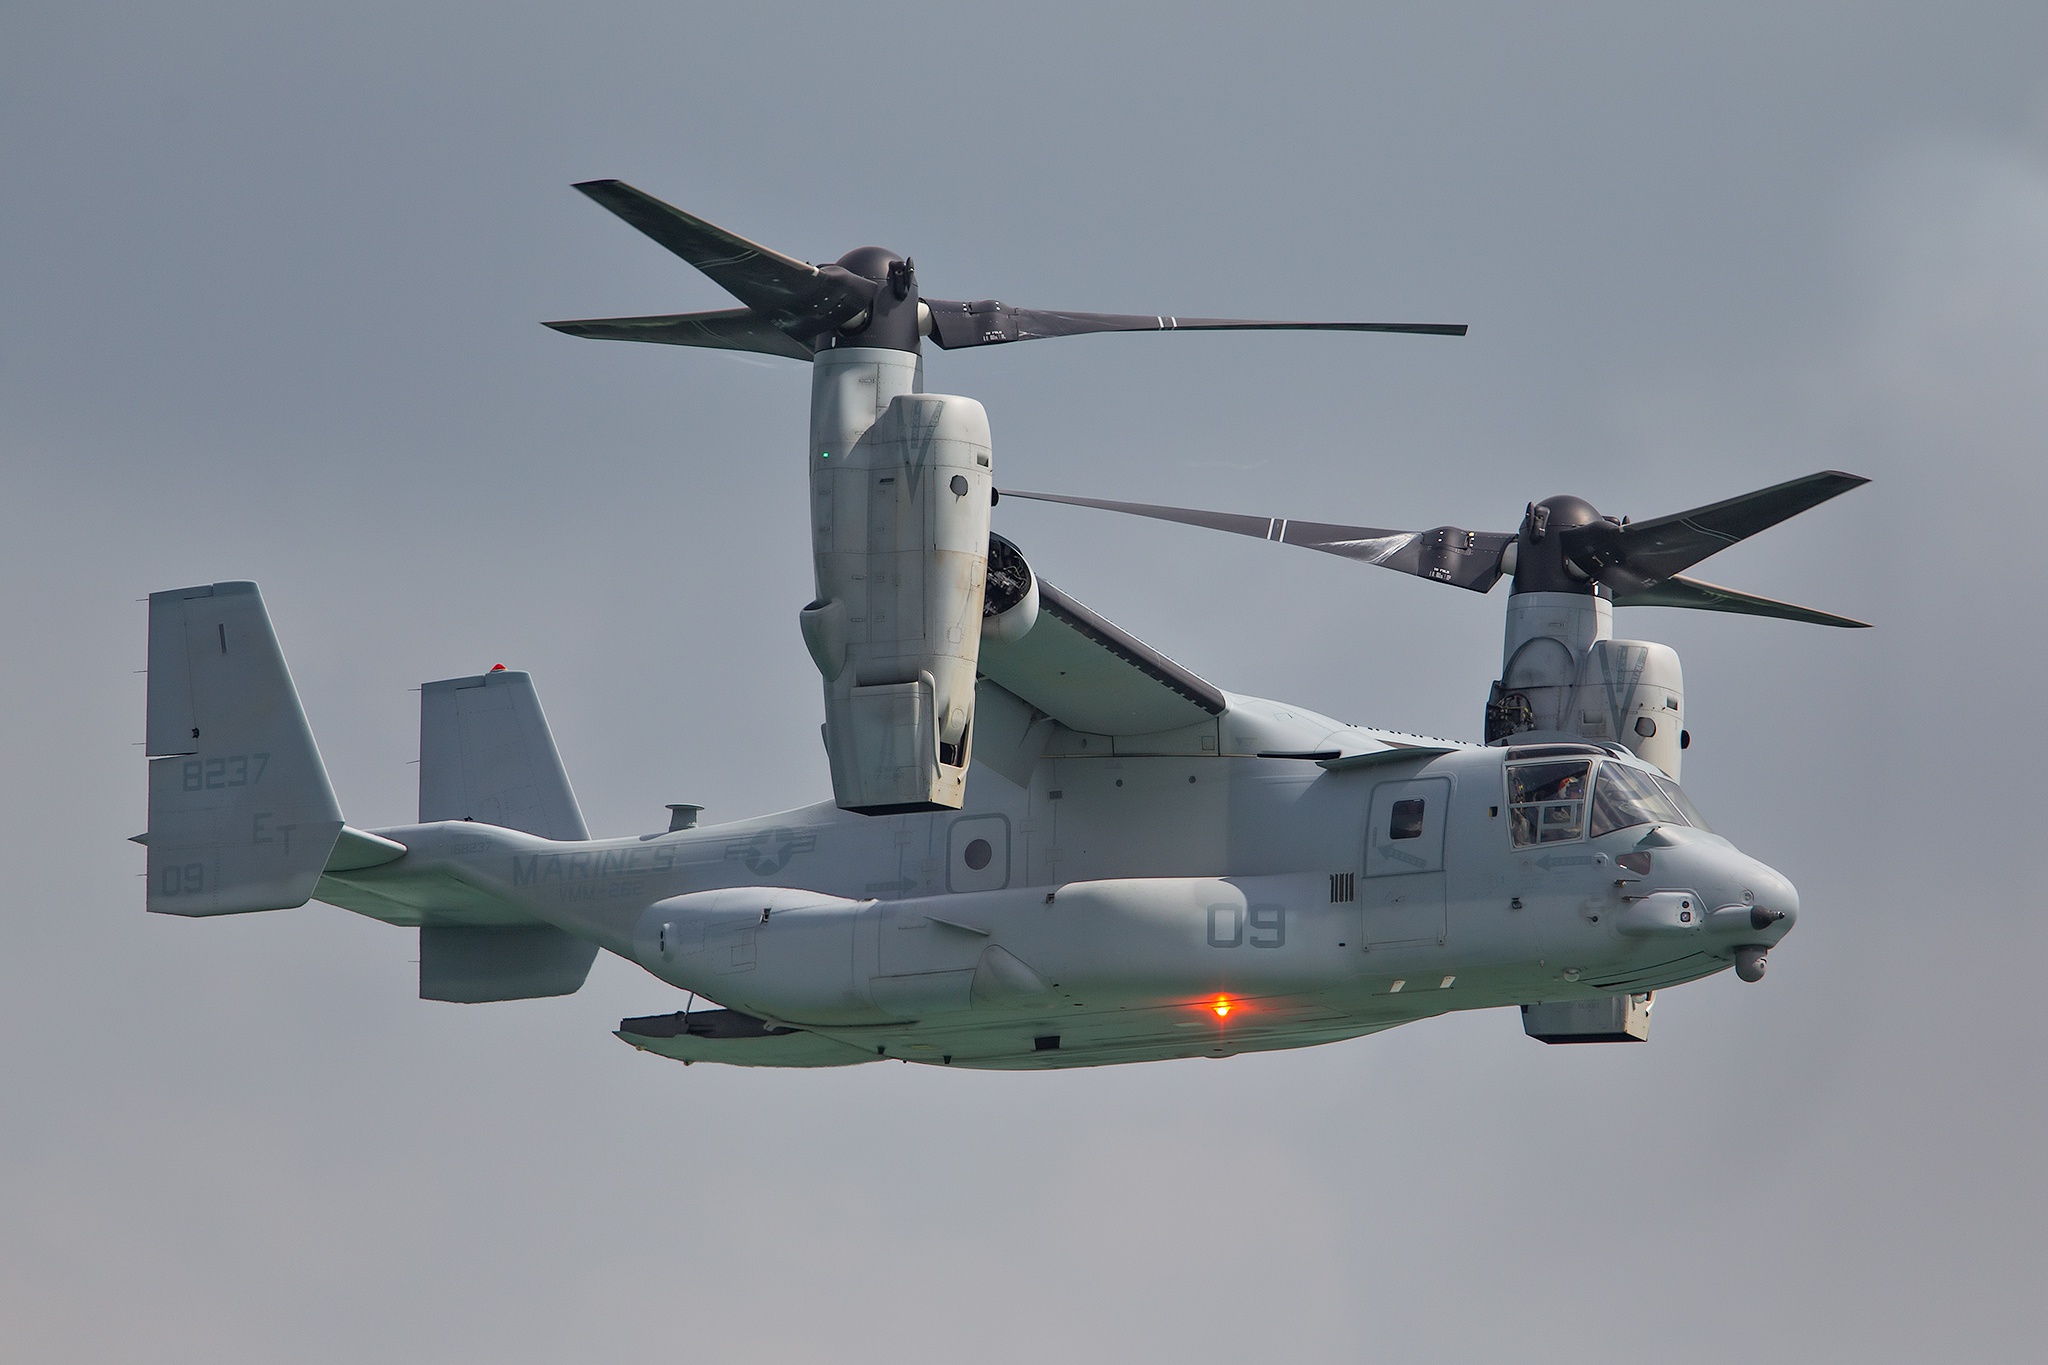 military, bell boeing v 22 osprey, aircraft, transport aircraft, military helicopters